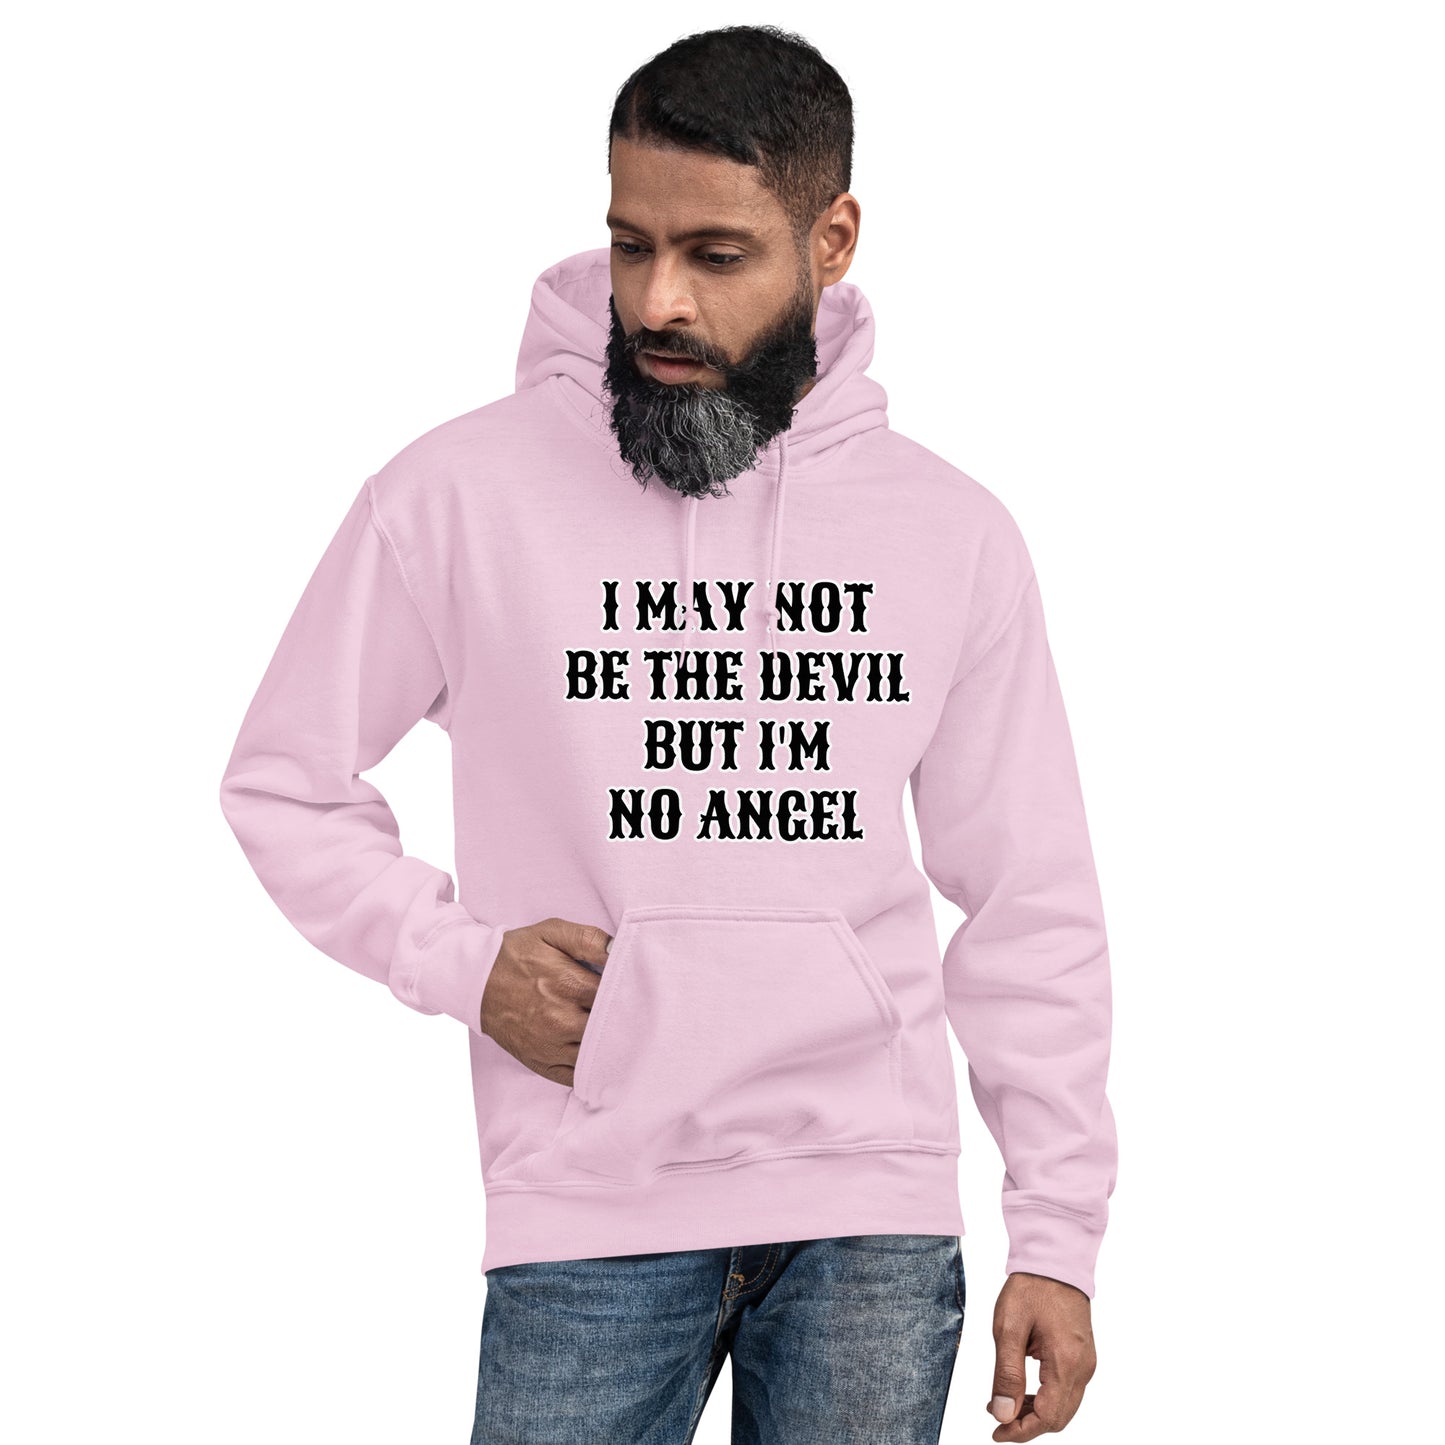 I MAY NOT BE THE DEVIL BUT I'M NO ANGEL- Unisex Hoodie